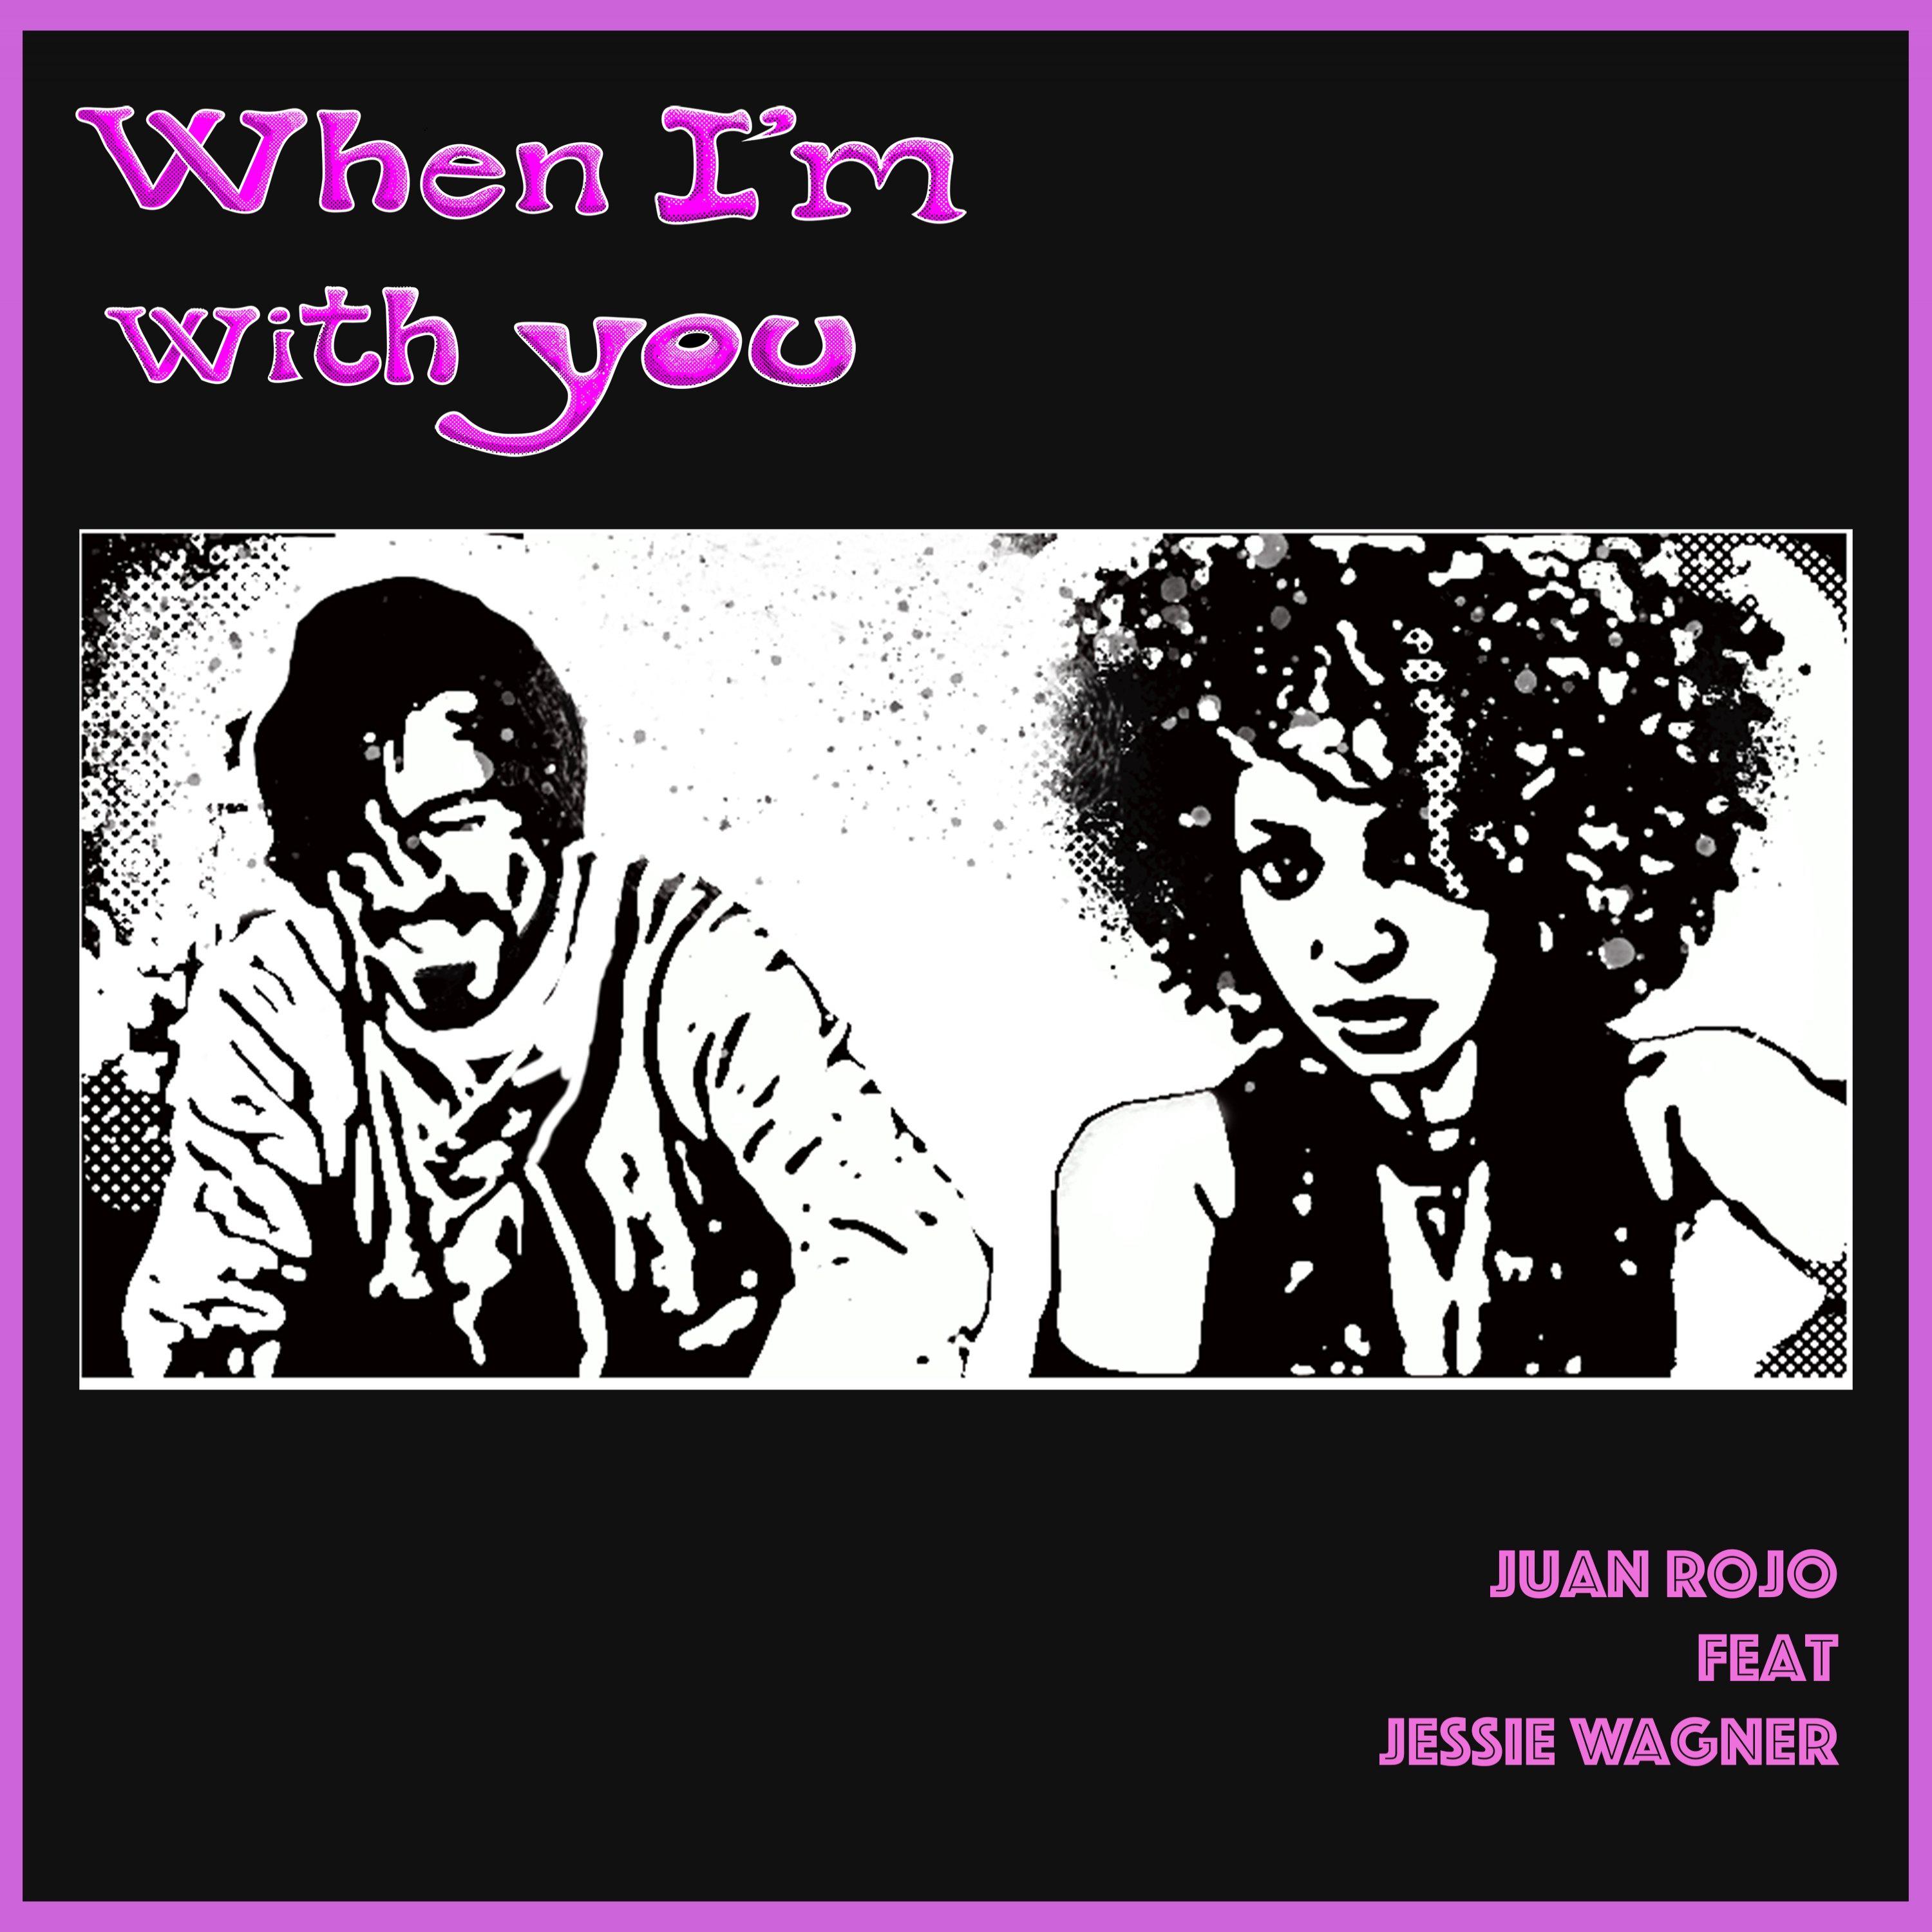 Juan Rojo - When I'm with you ('Acoustic' Mix)